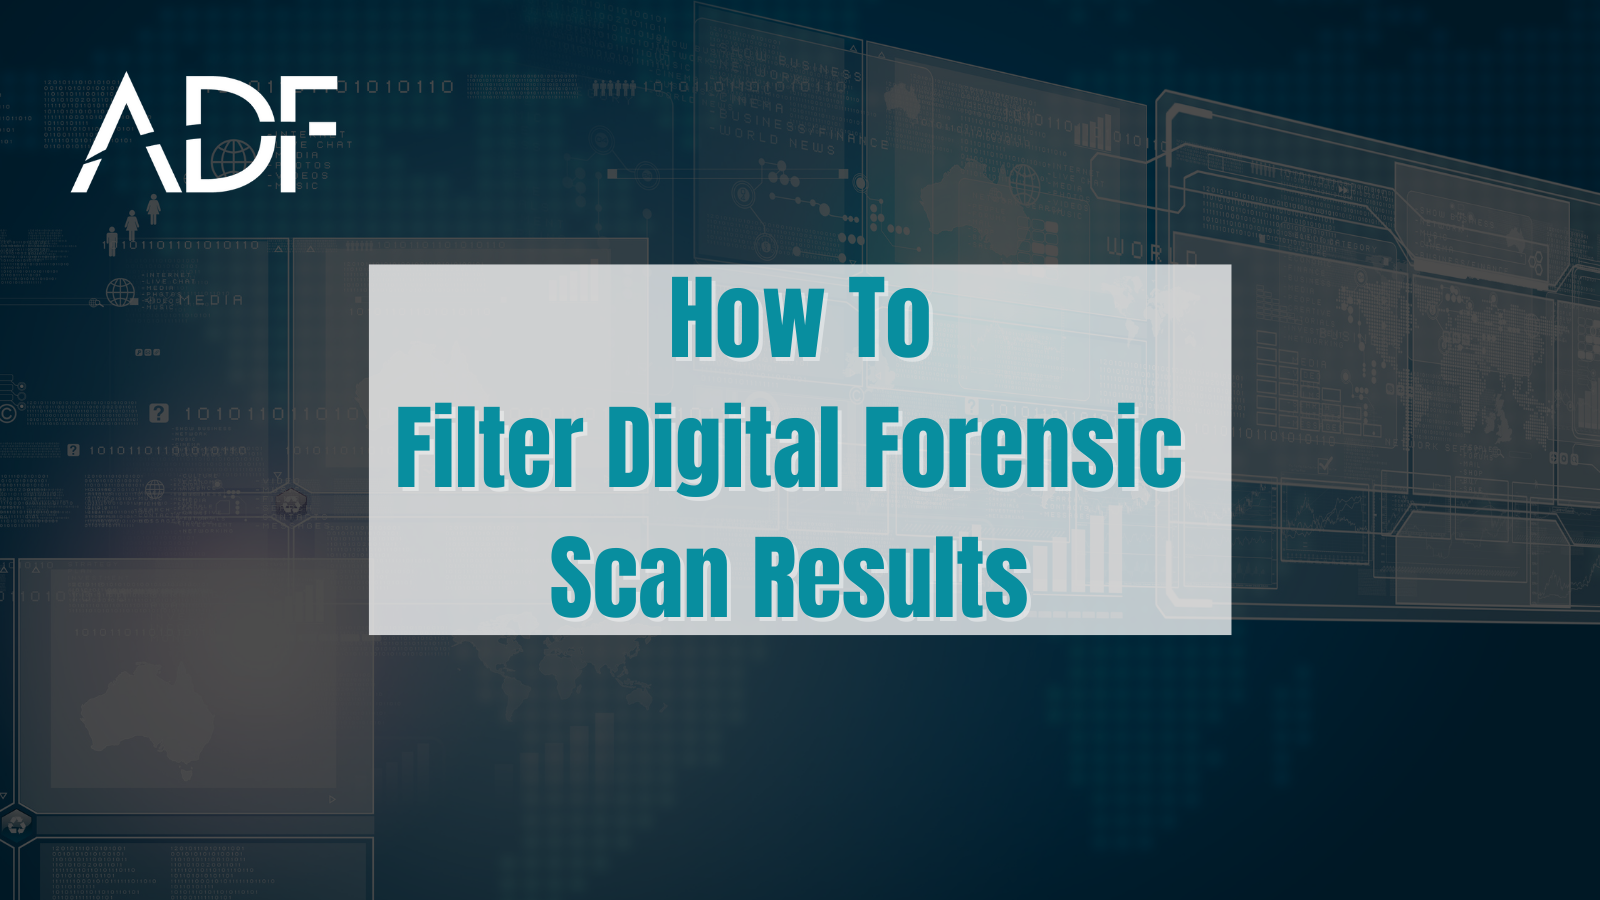 Learn How To Filter Digital Forensic Scan Results in ADF Software